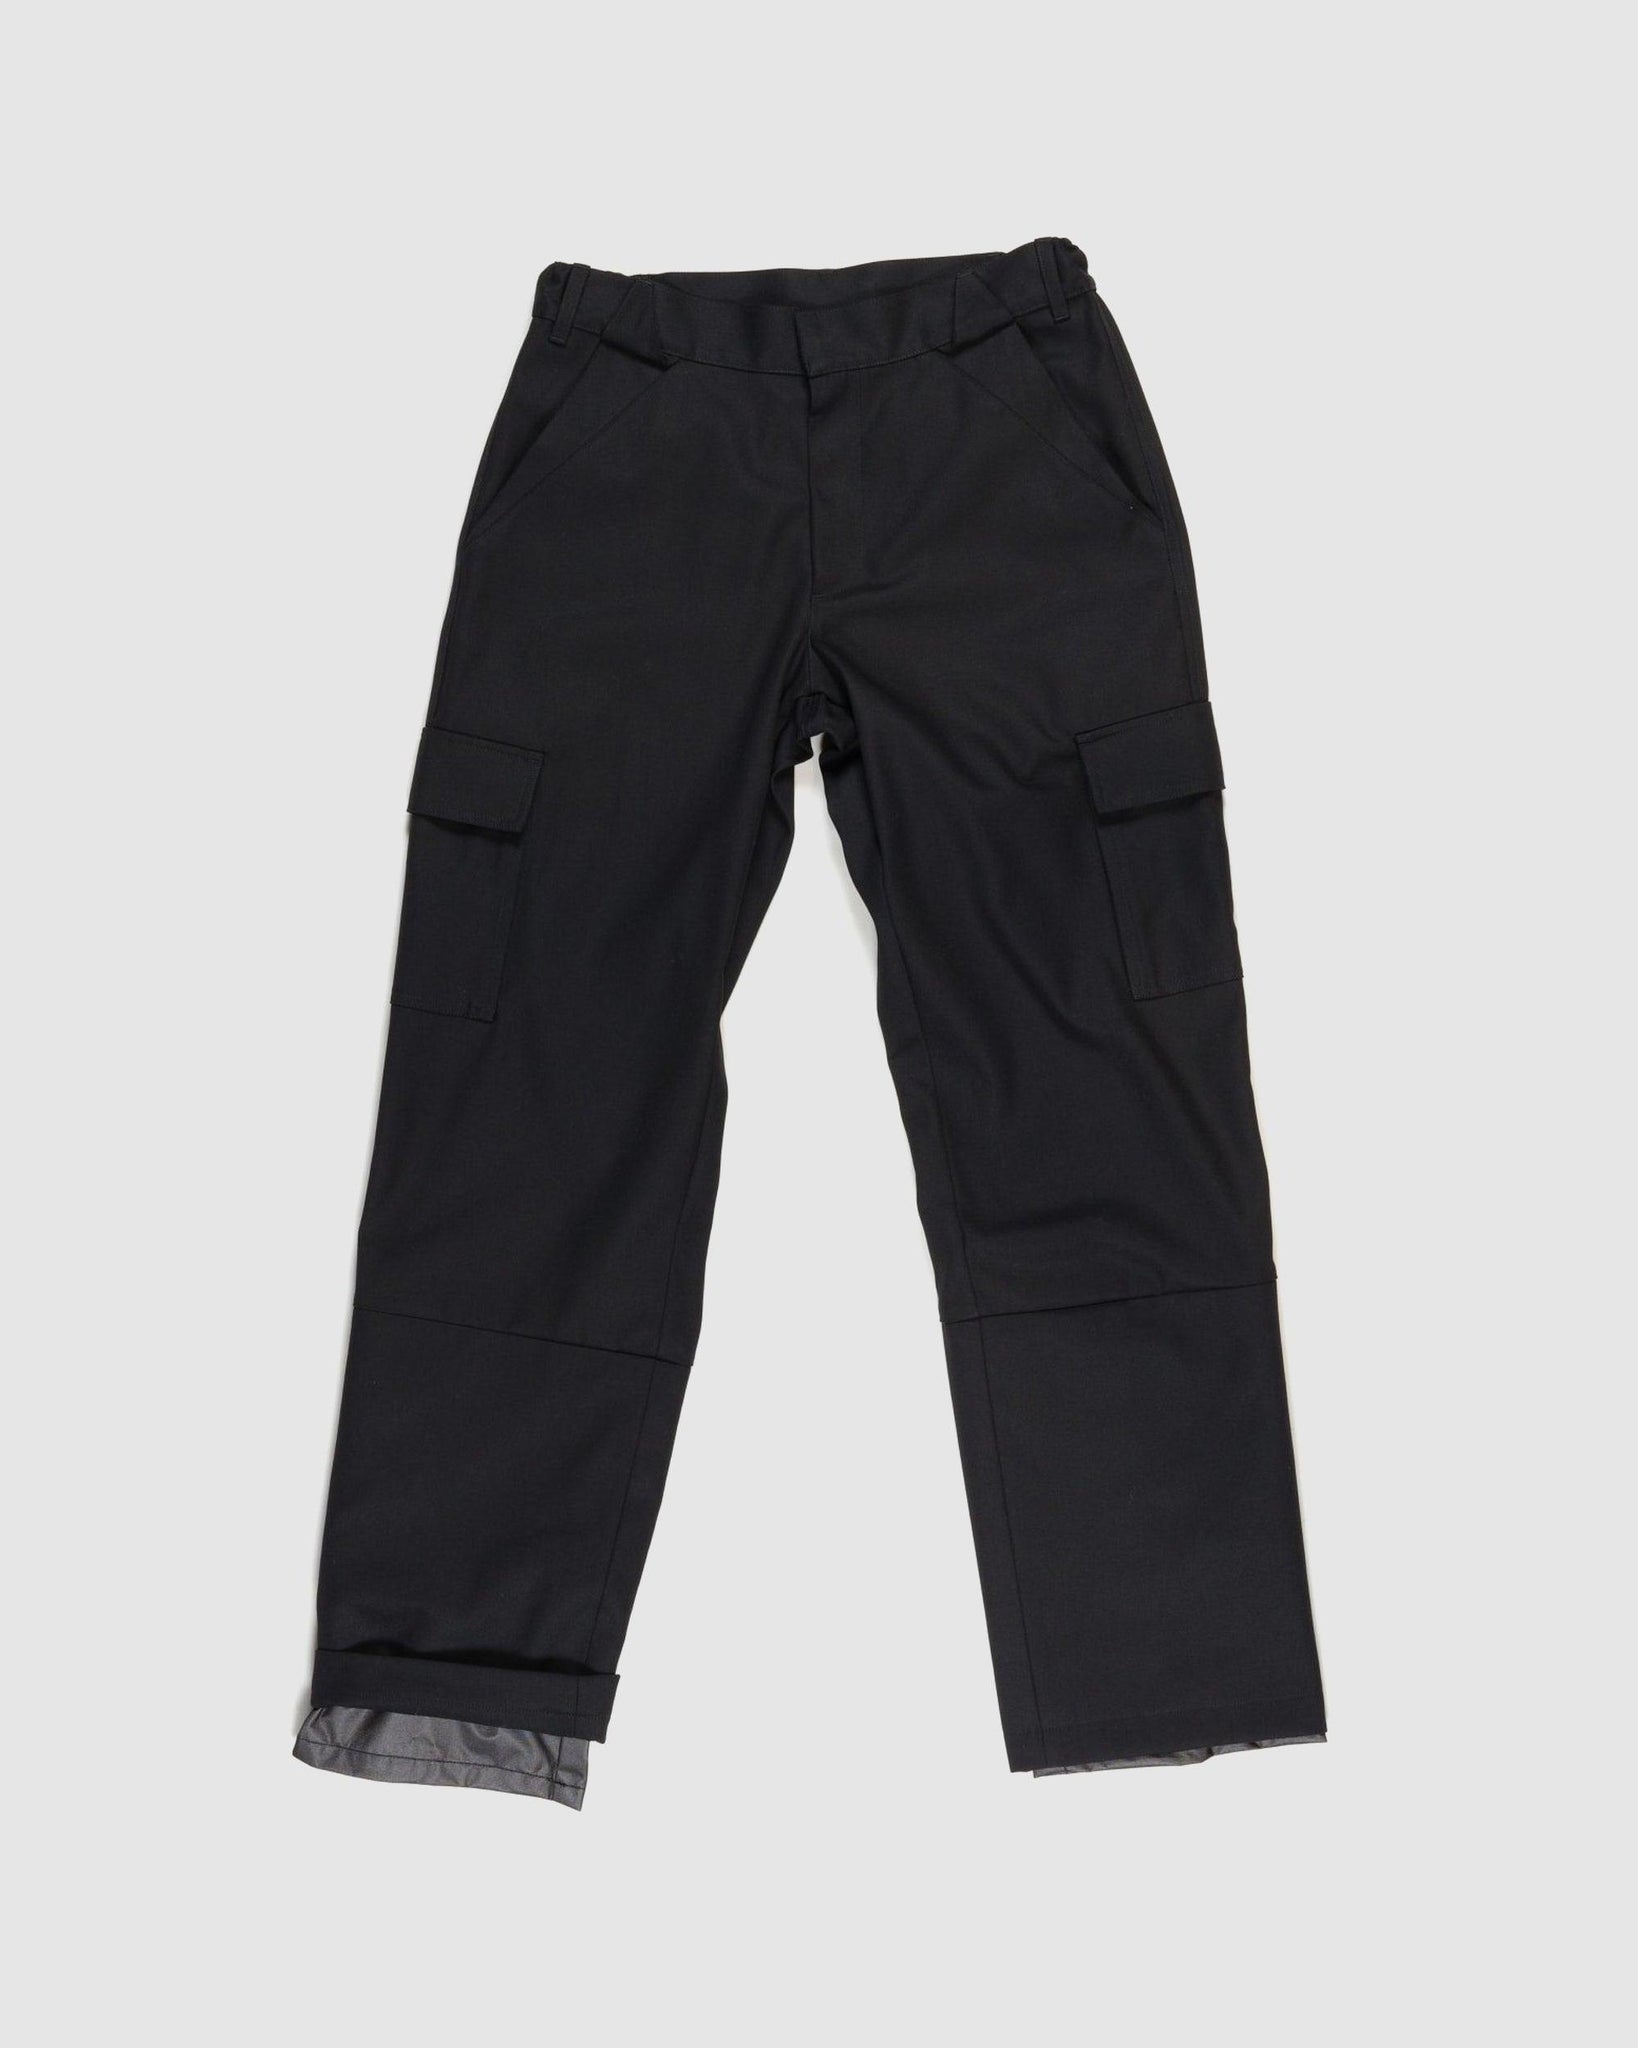 Klopman Replicated Light Pants - {{ collection.title }} - Chinatown Country Club 